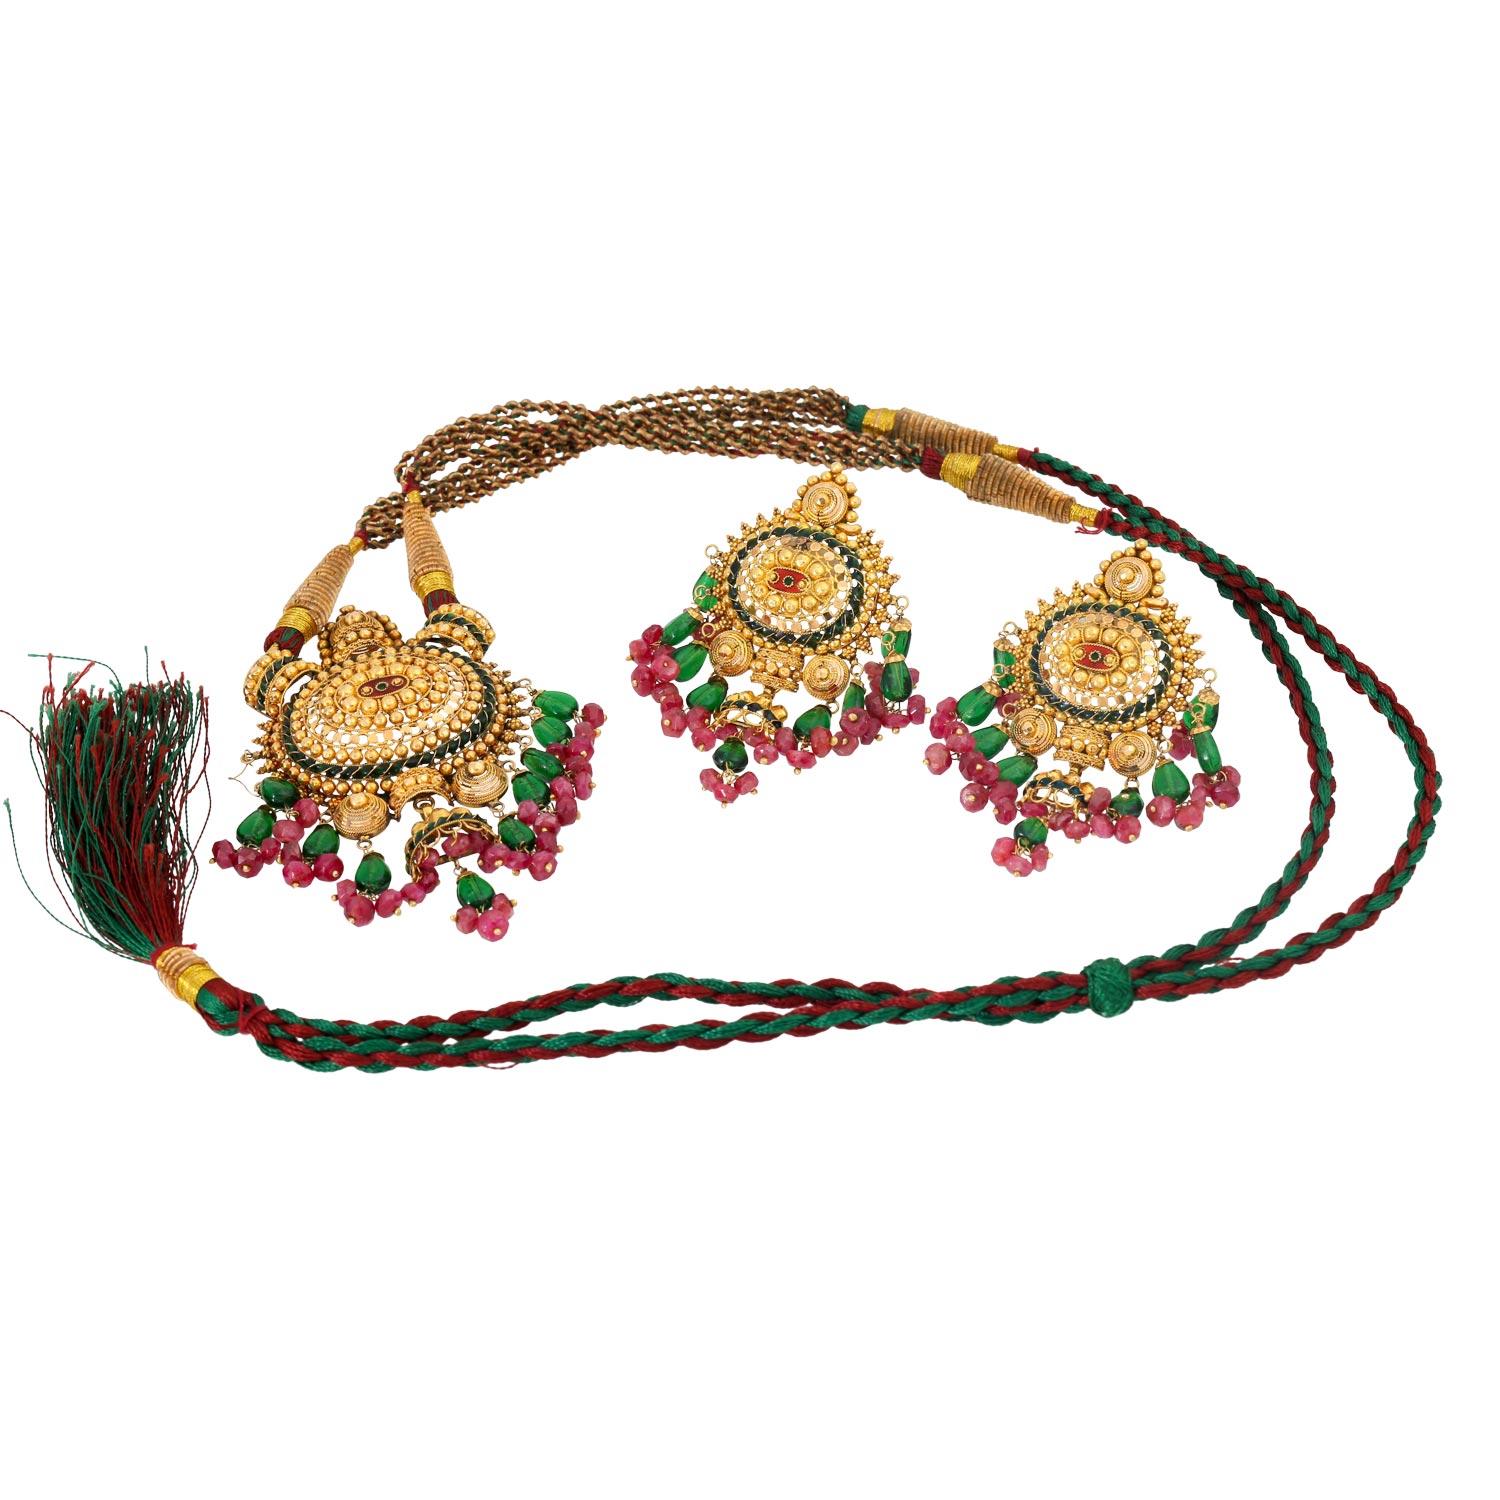 with rubies and green glass, 14K yellow gold, finely gold-plated, partly enamelled, pendant approx. 5x7 cm on a textile strap, earrings L: approx. 5 cm, gold weight approx. 30 g, probably Asia 20th/21st Century, slight signs of wear.

 Set necklace